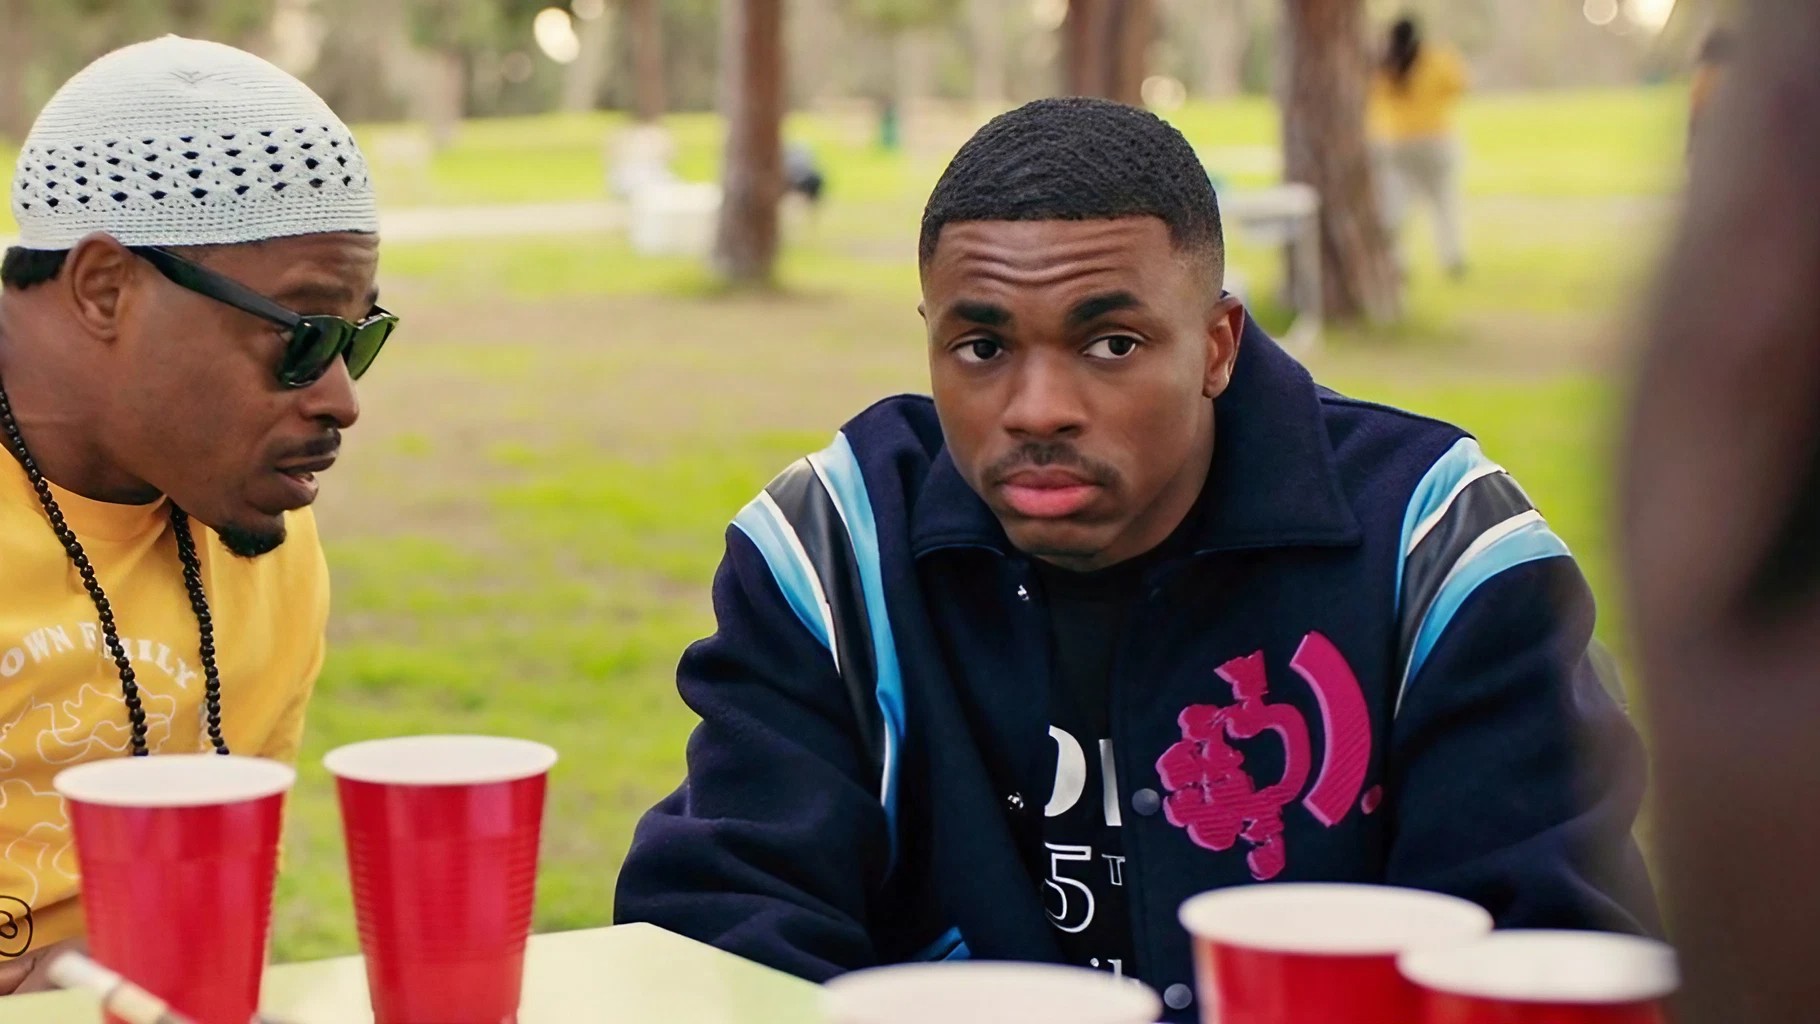 Is The Vince Staples Show Based On The Rapper's Real Life? 